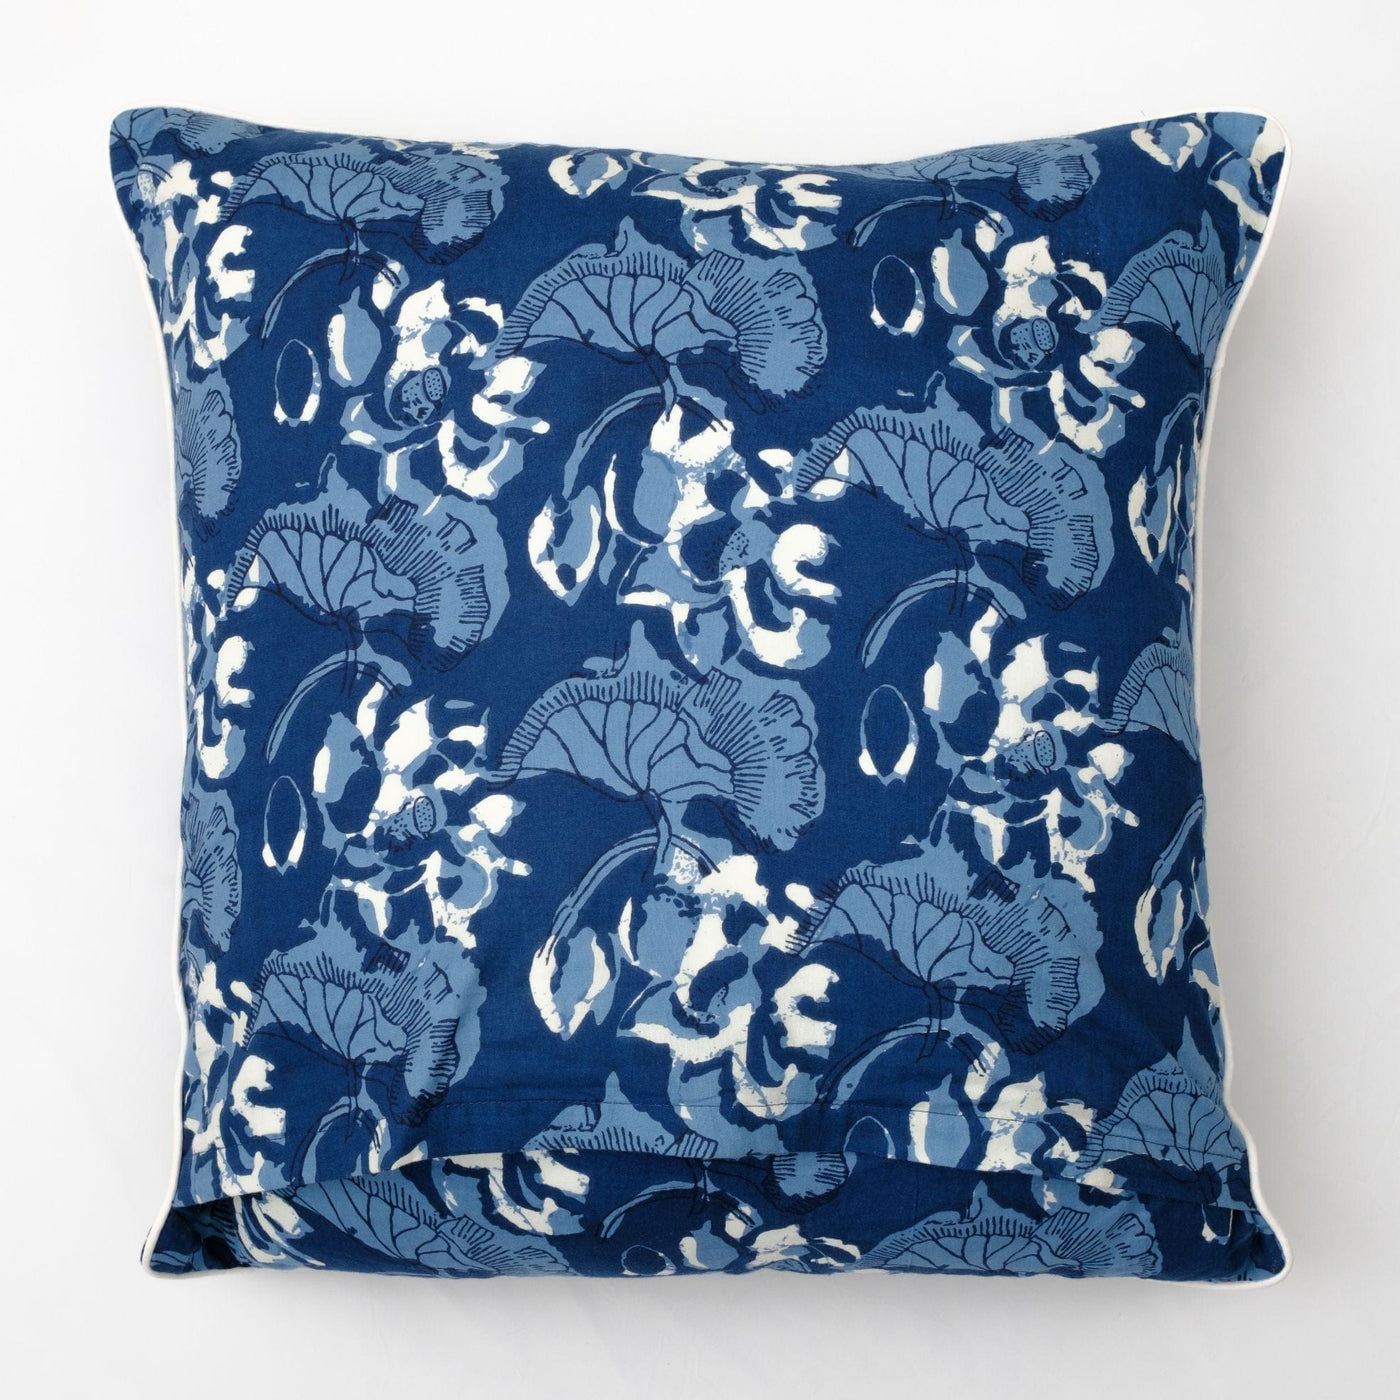 The Fabricrush  Pillowcases & Shams Tree of Life Blue Embroidered Cushion Cover